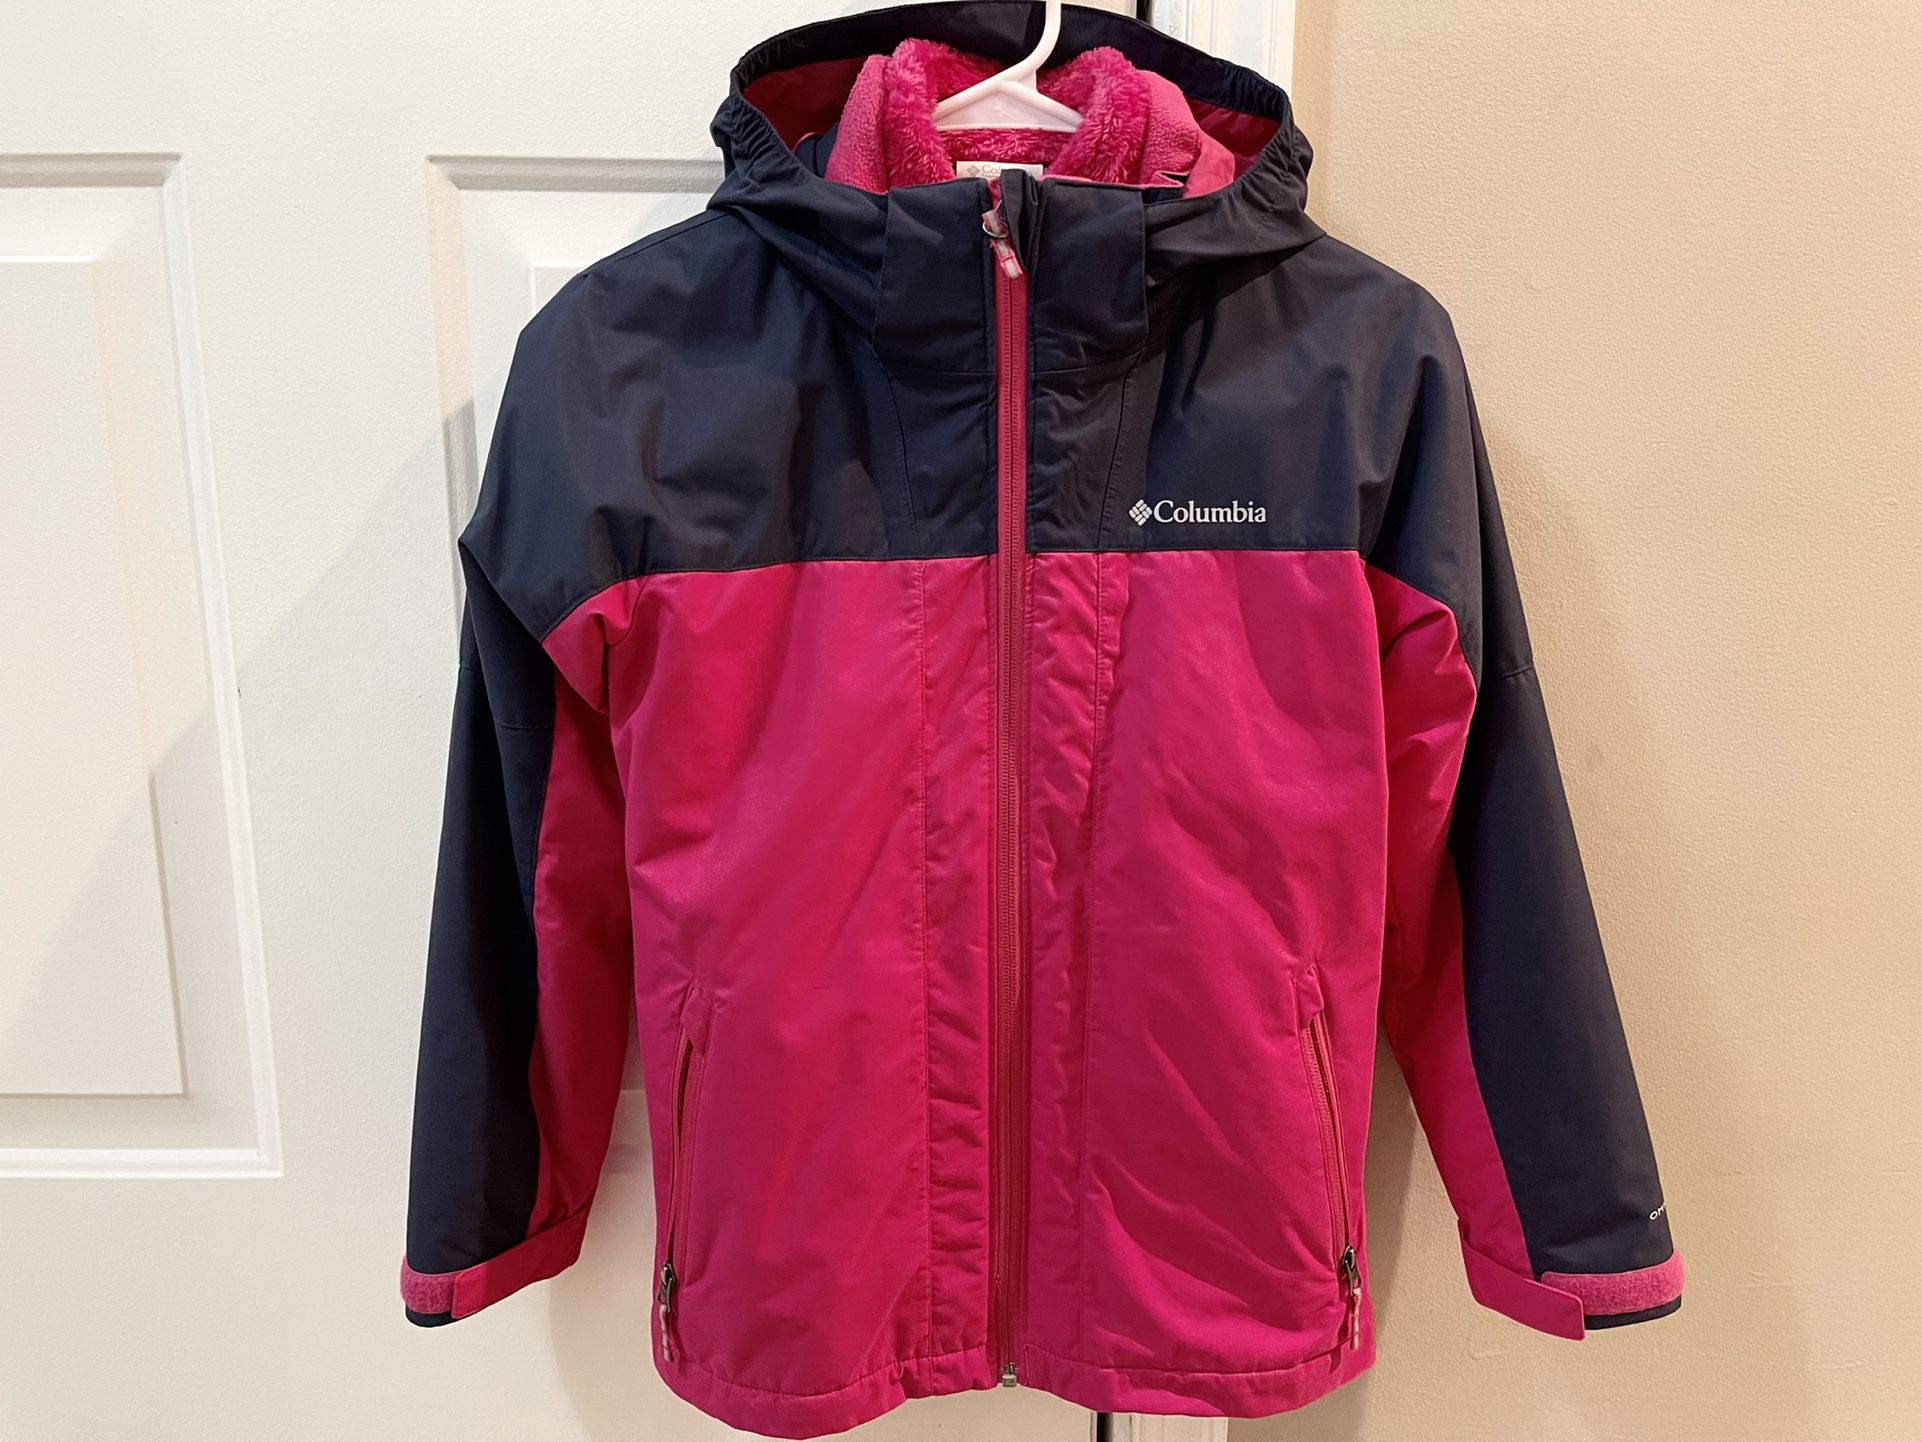 Columbia Girls’ All-Season 3-in-1 Waterproof Parka. Youth M (Age 10-12). 